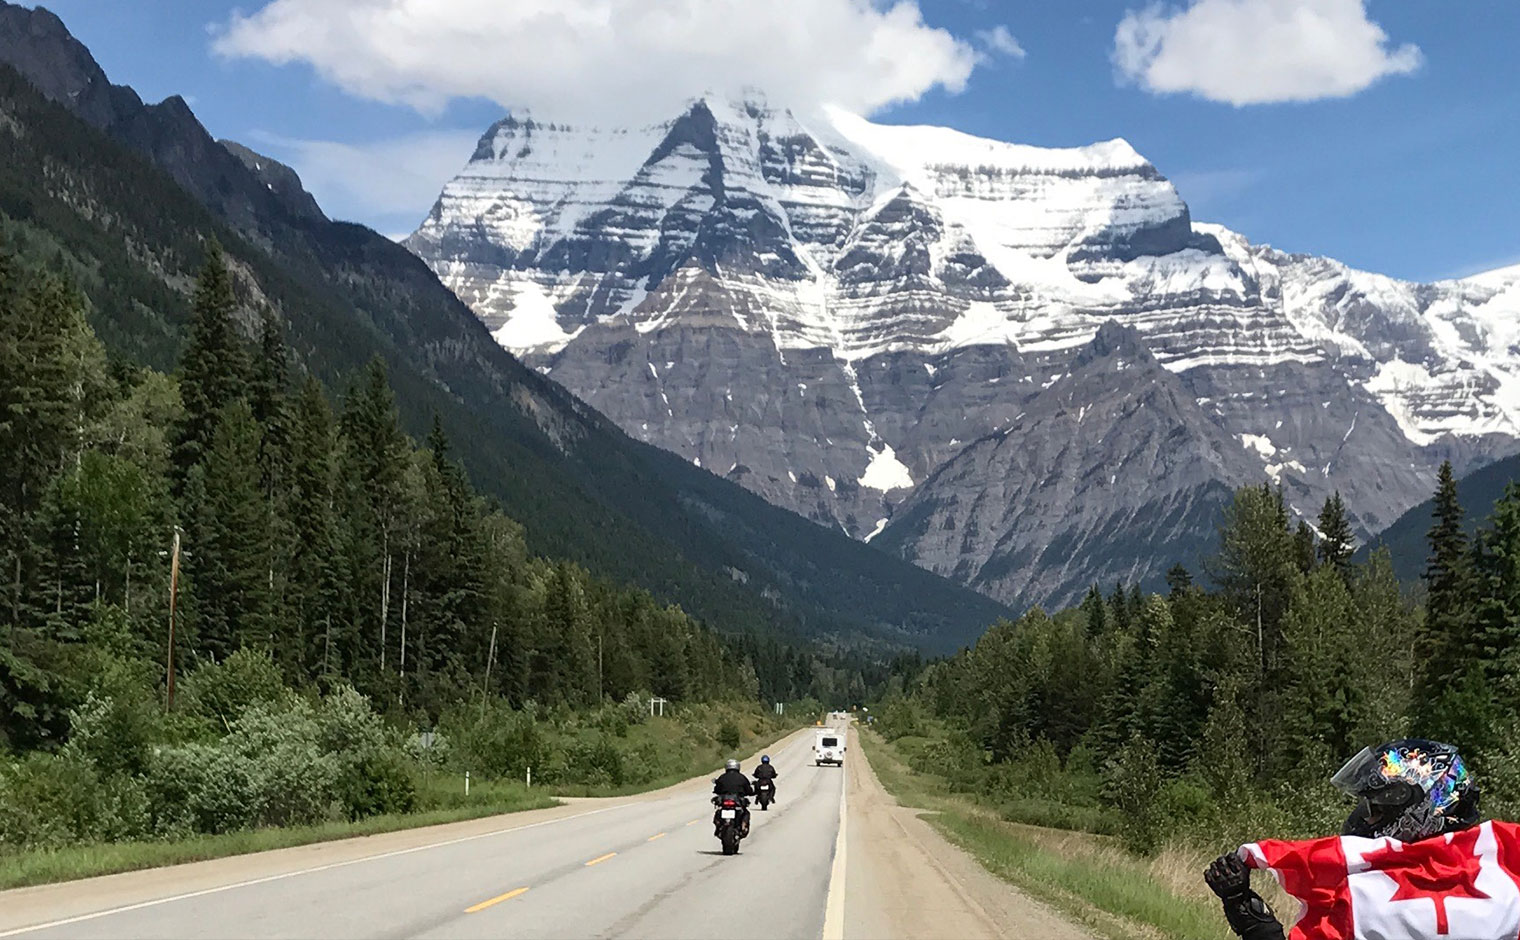 Mount Robson, the highest point in the Canadian Rockies, looming over motorcyclists riding down Route 16